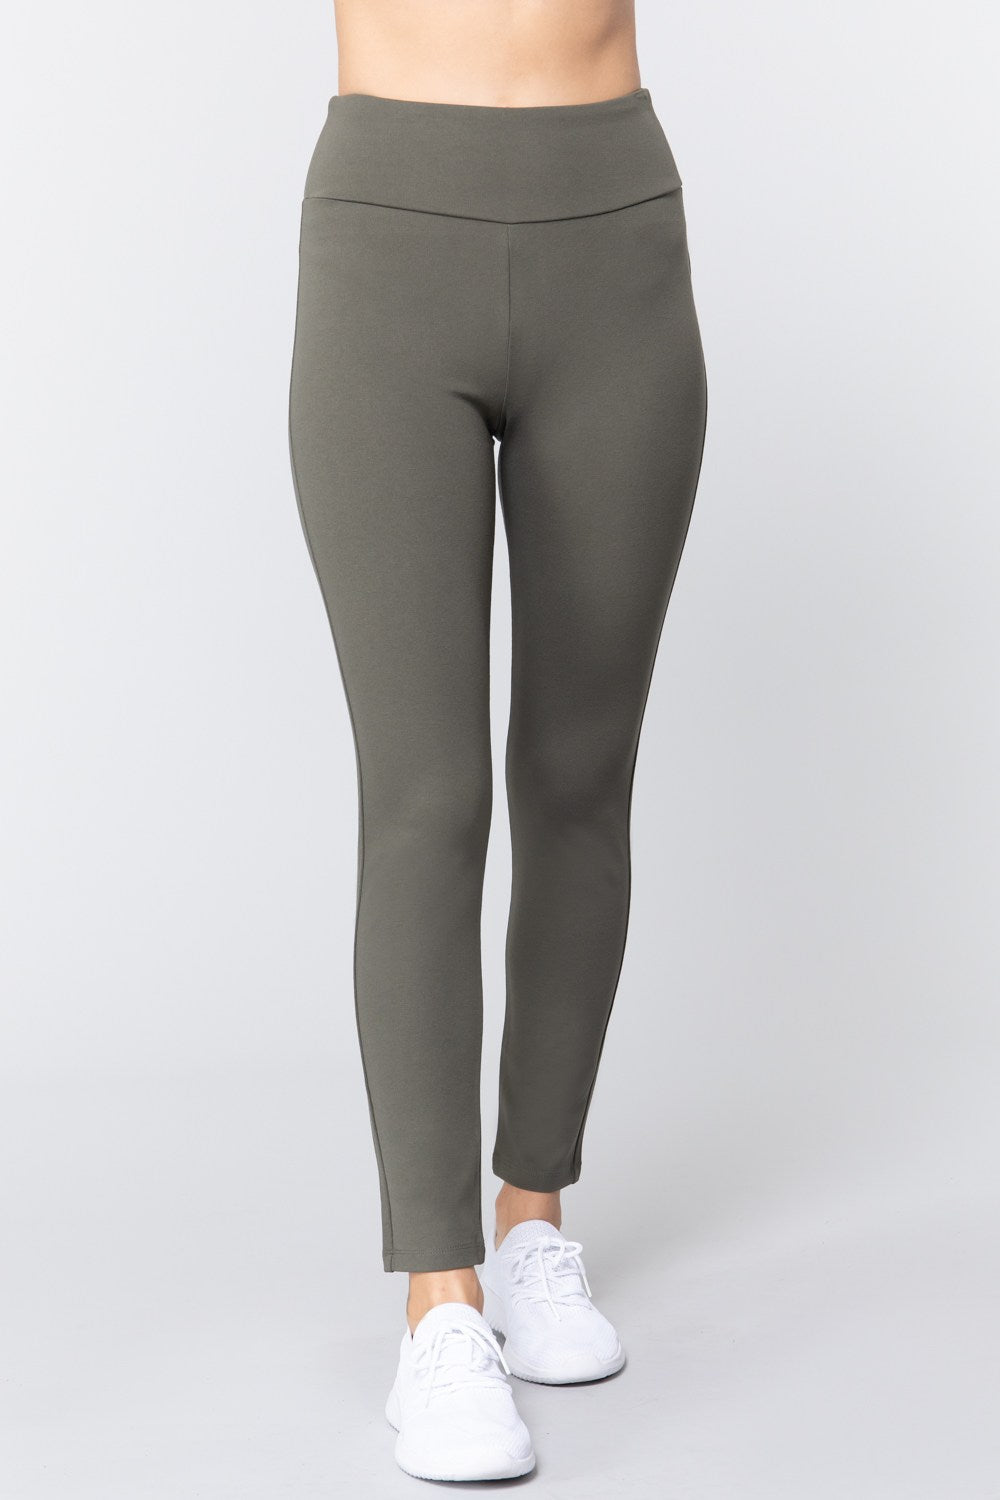 Faux Pocket Ponte Pants in Olive Gray